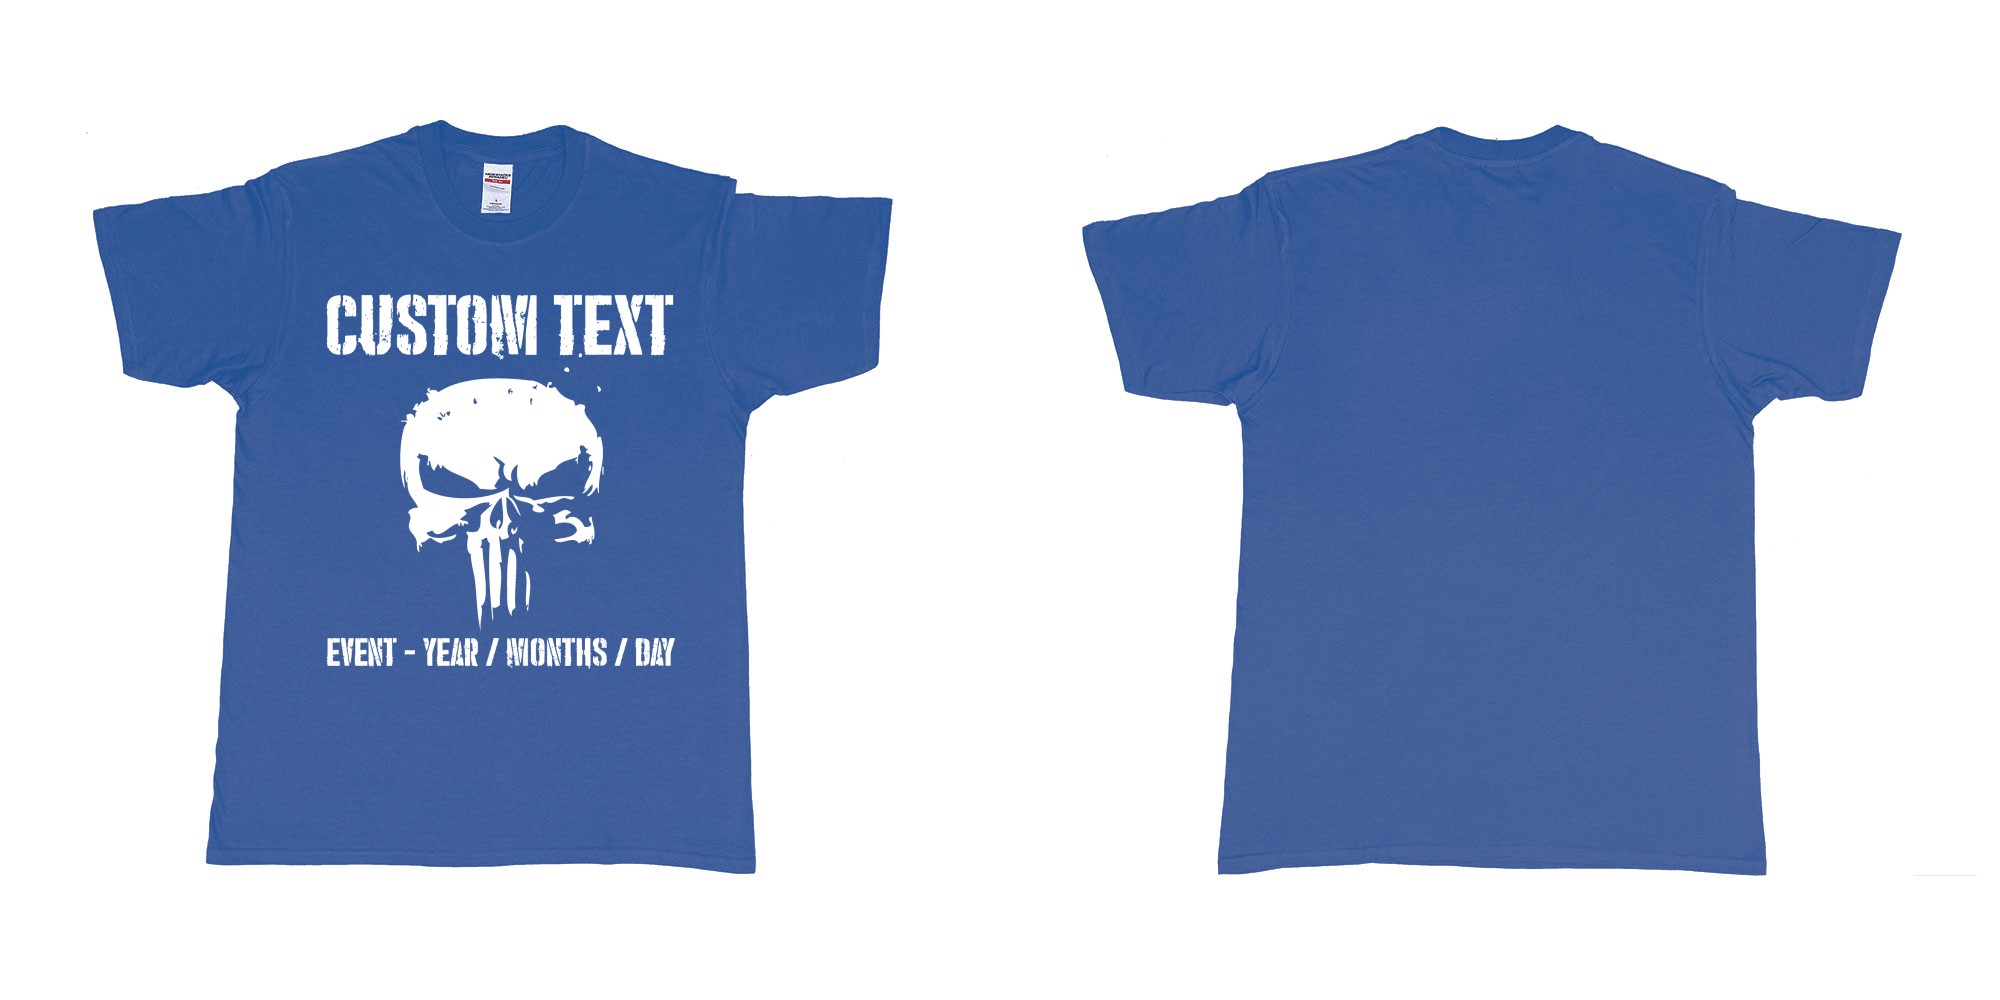 Custom tshirt design the punisher scull logo custom text in fabric color royal-blue choice your own text made in Bali by The Pirate Way